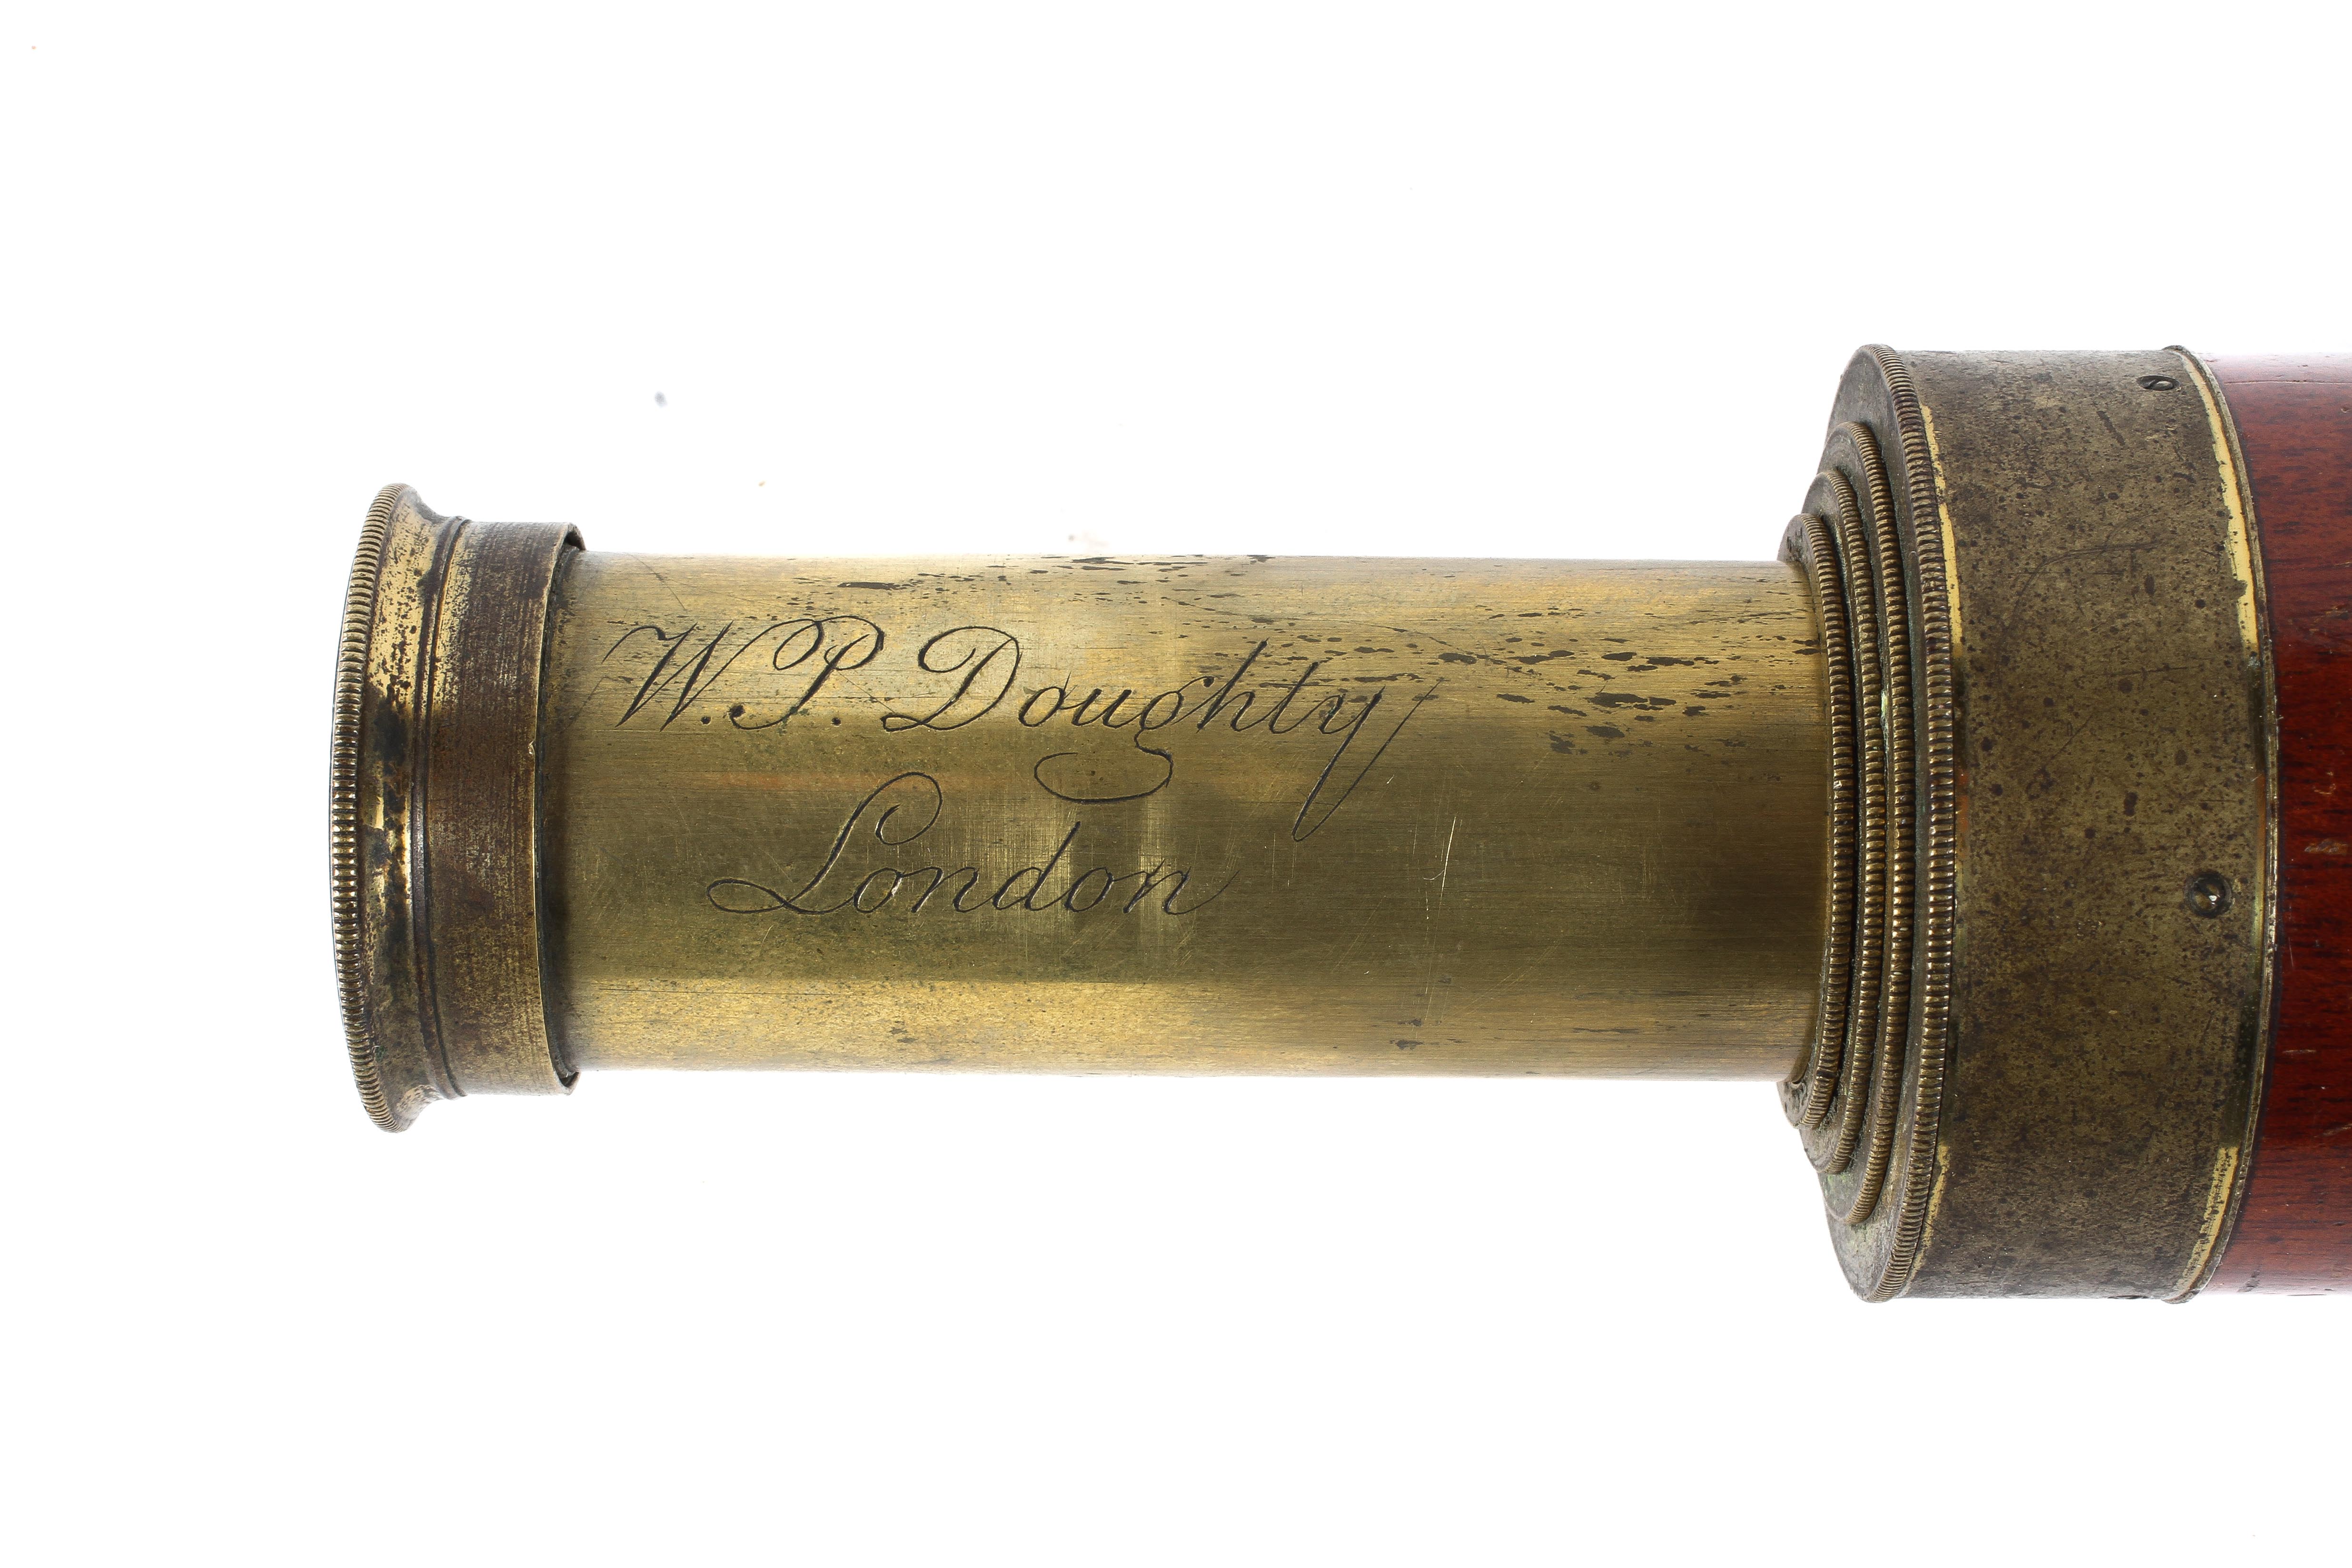 A 19th century telescope by WP Doughty (London), engraved mark, - Image 3 of 3